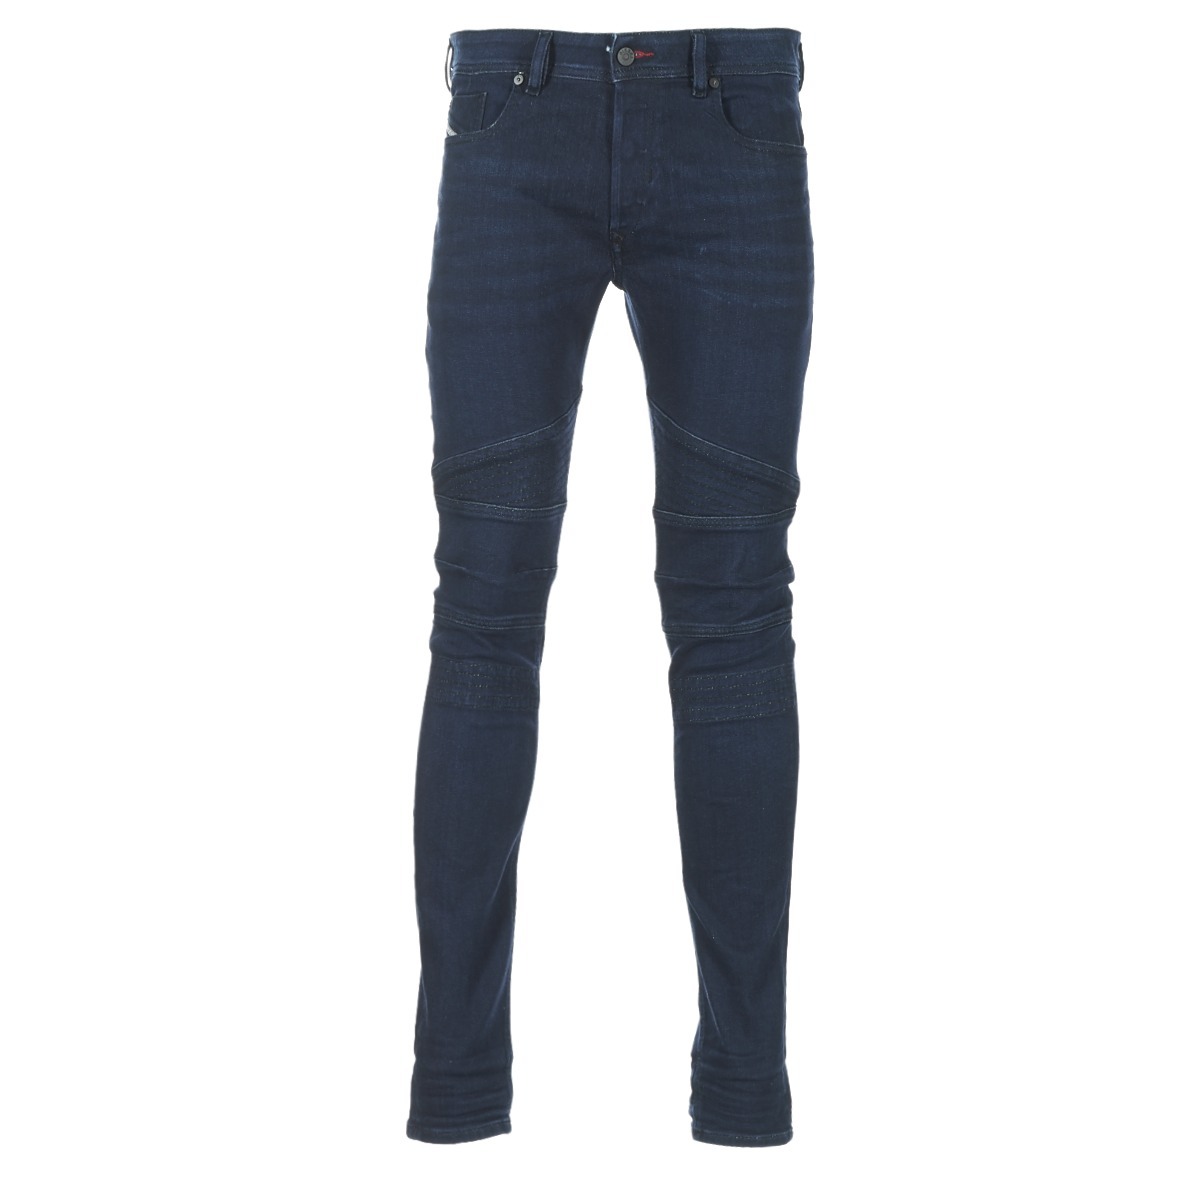 Men's Blue Skinny Jeans from Spartoo GOOFASH